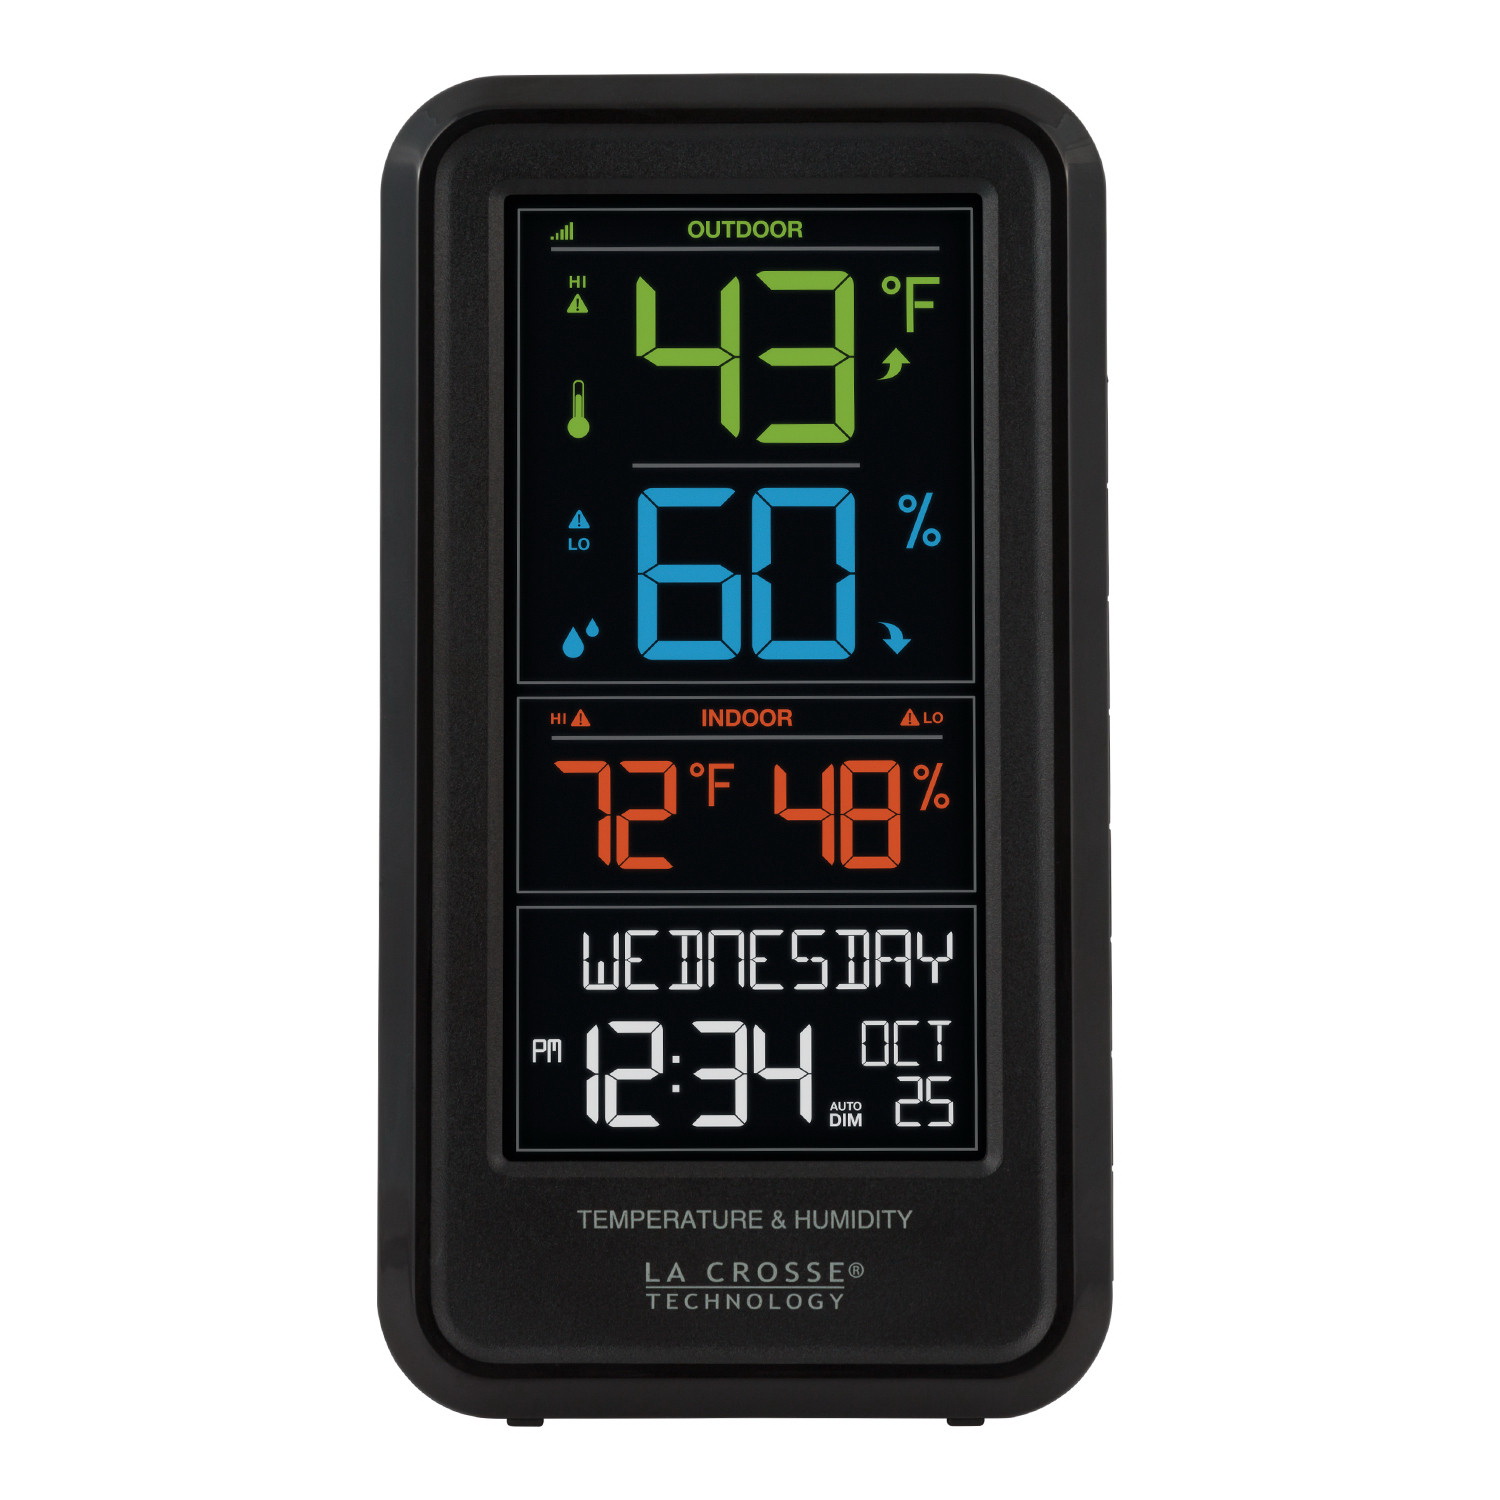 S82967 Weather Station, Battery, 32 to 99 deg F Indoor, -40 to 140 deg F Outdoor, 10 to 99 % Humidity Range